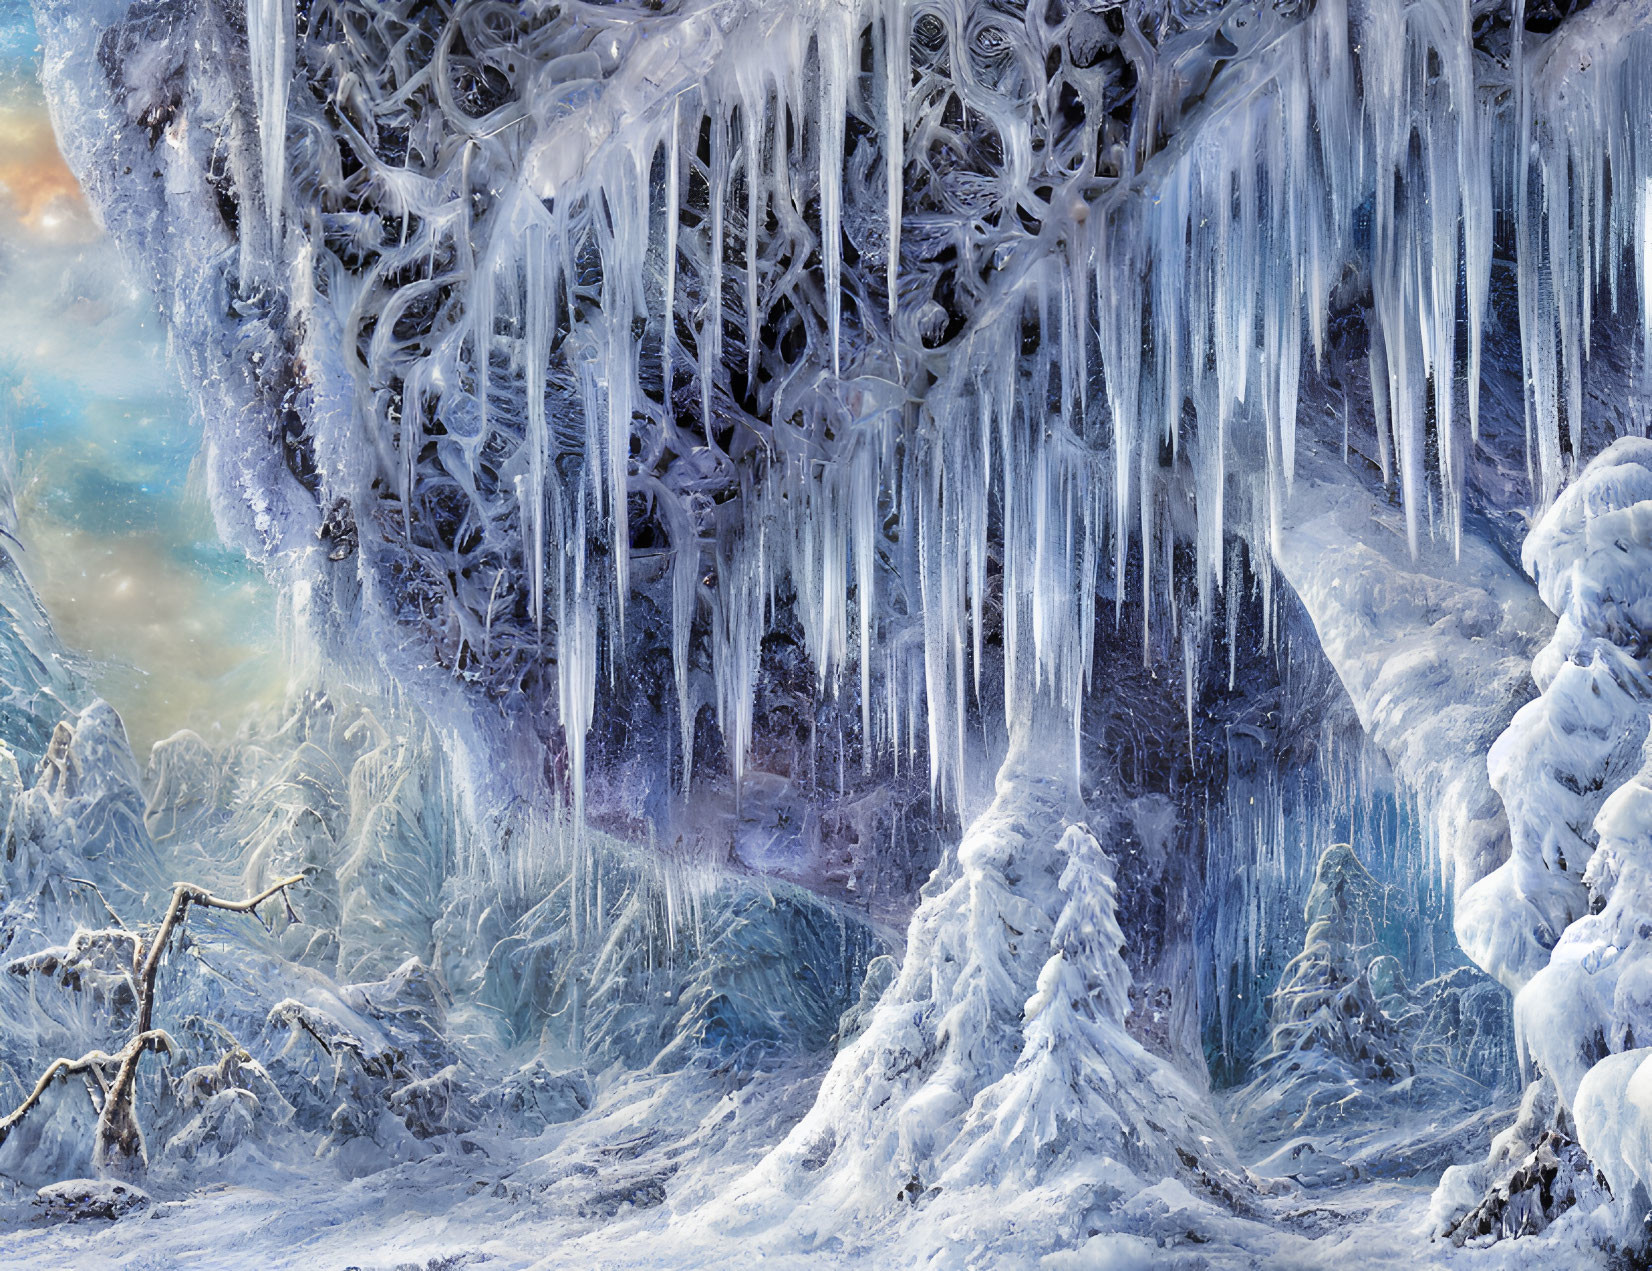 Winter Cave Entrance with Icy Stalactites and Snowy Trees